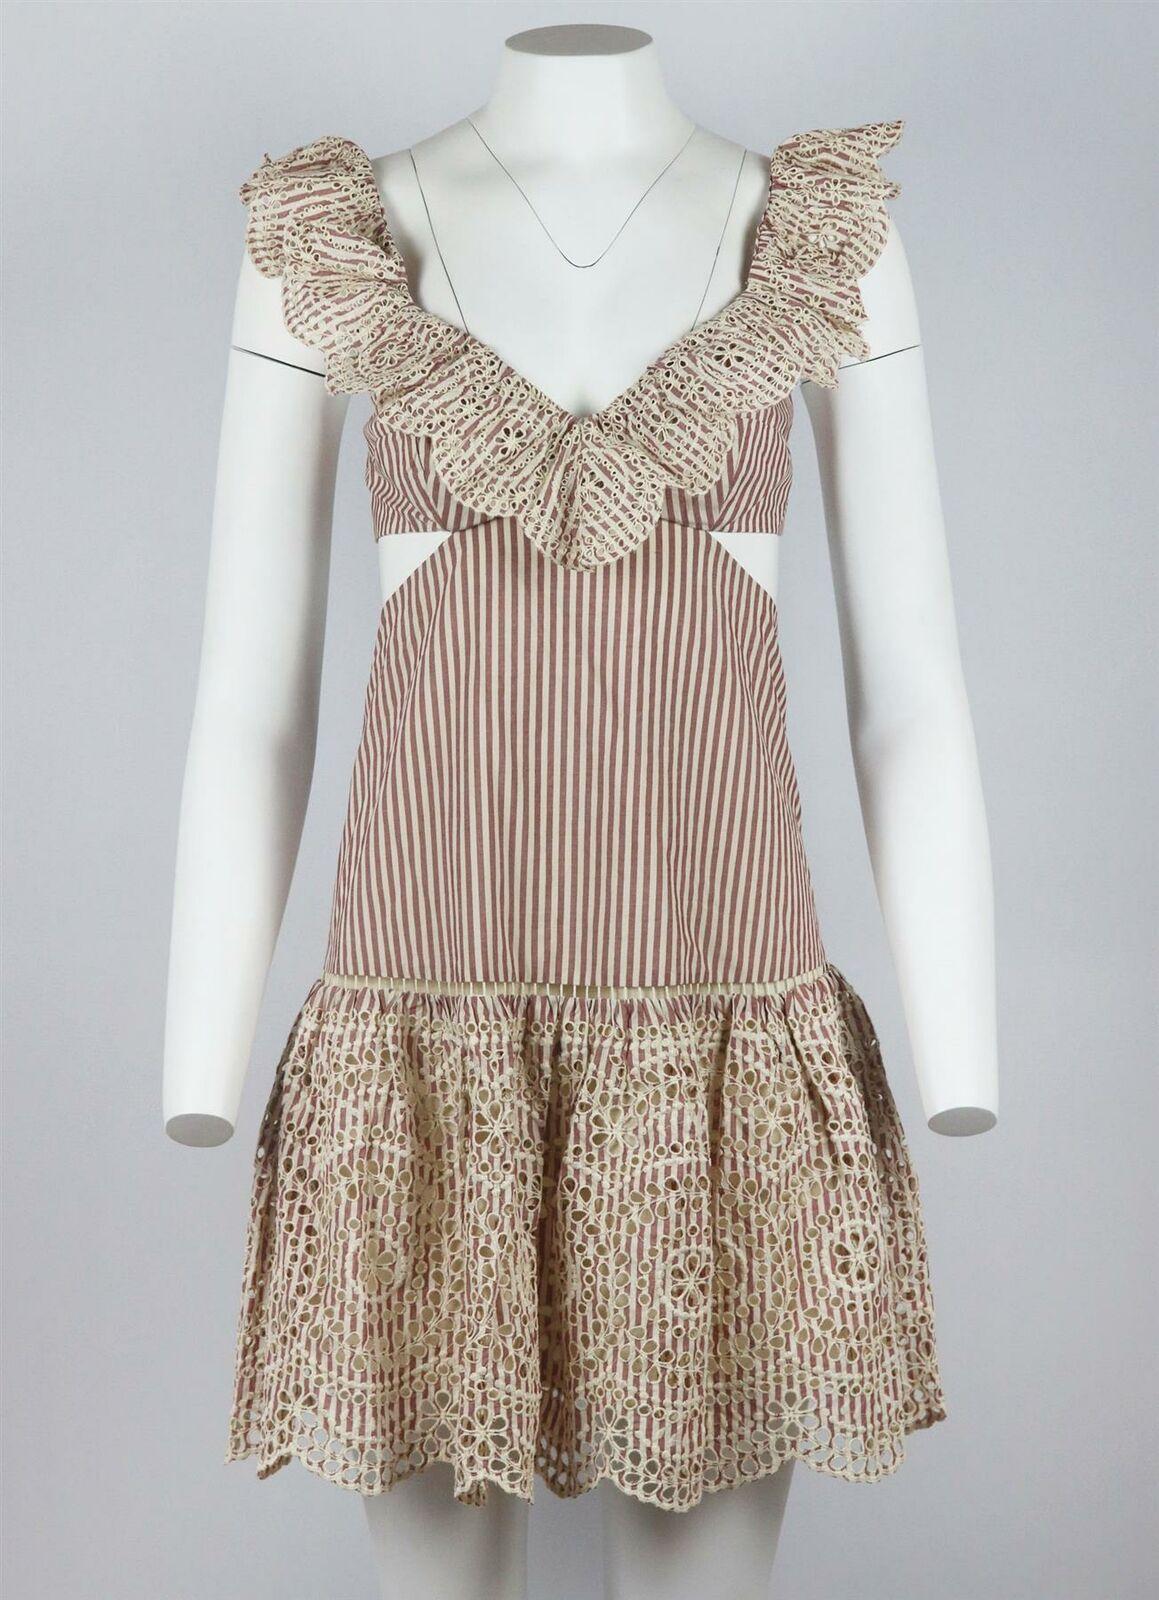 Zimmermann's 'Meridian' dress is made from intricate broderie anglaise cotton and fully lined for coverage, it has flouncy ruffled trims and a cutout at the back and sides for a fun feel.
Pink and cream cotton.
Hook and zip fastening at back.
100%